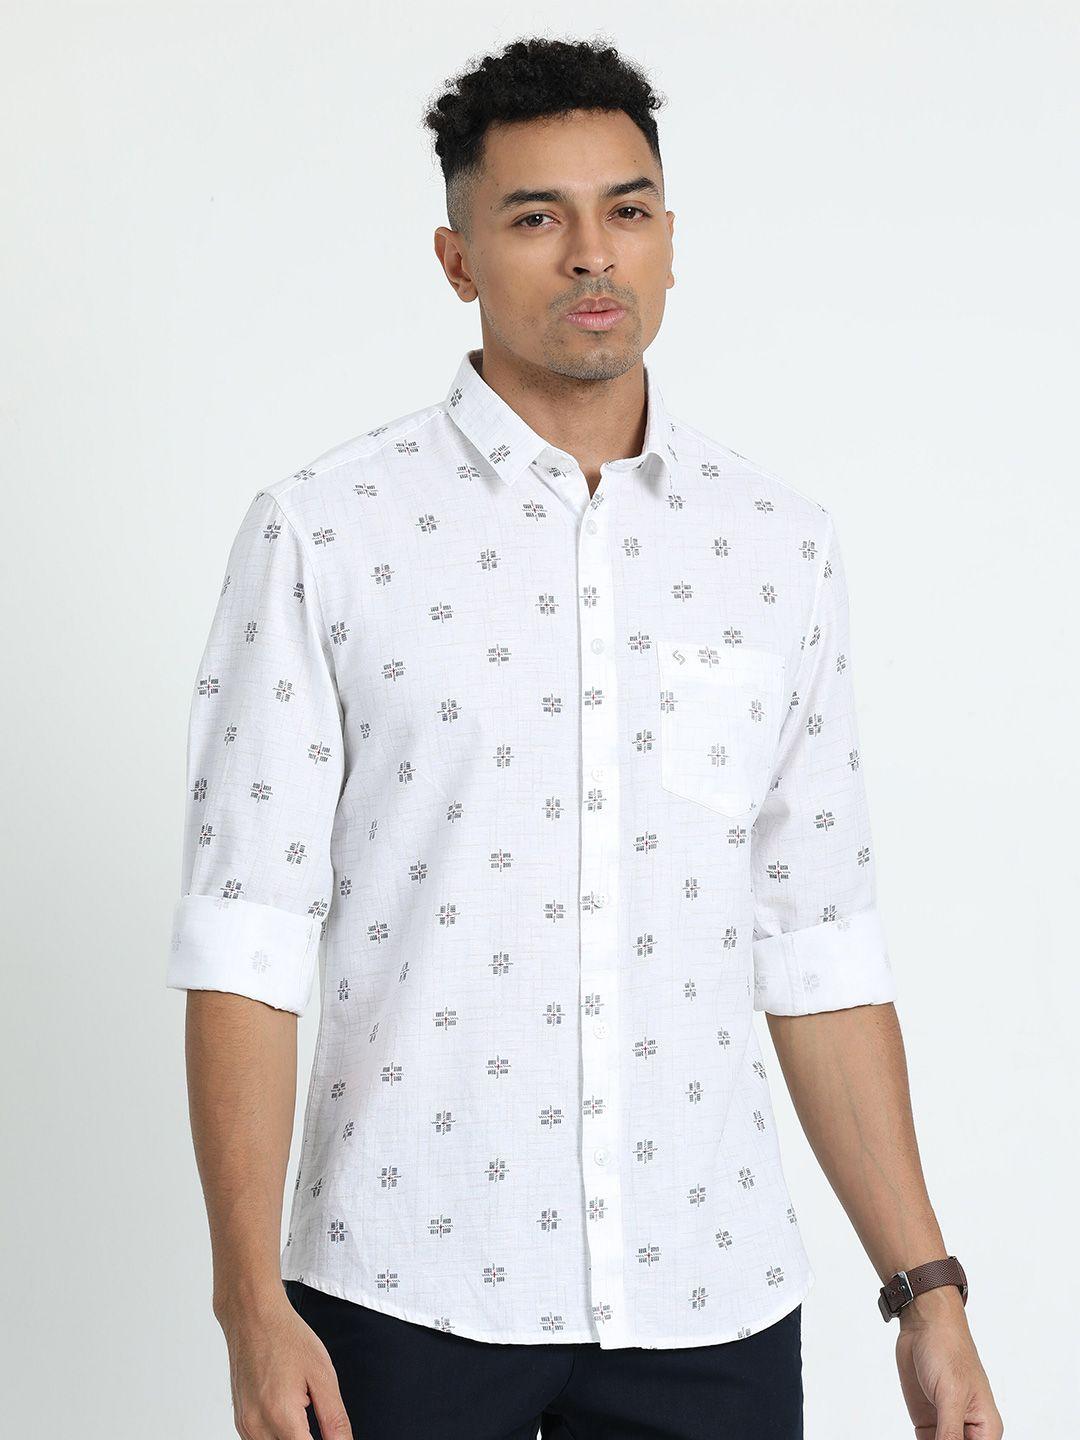 classic-polo-men-slim-fit-opaque-printed-casual-shirt